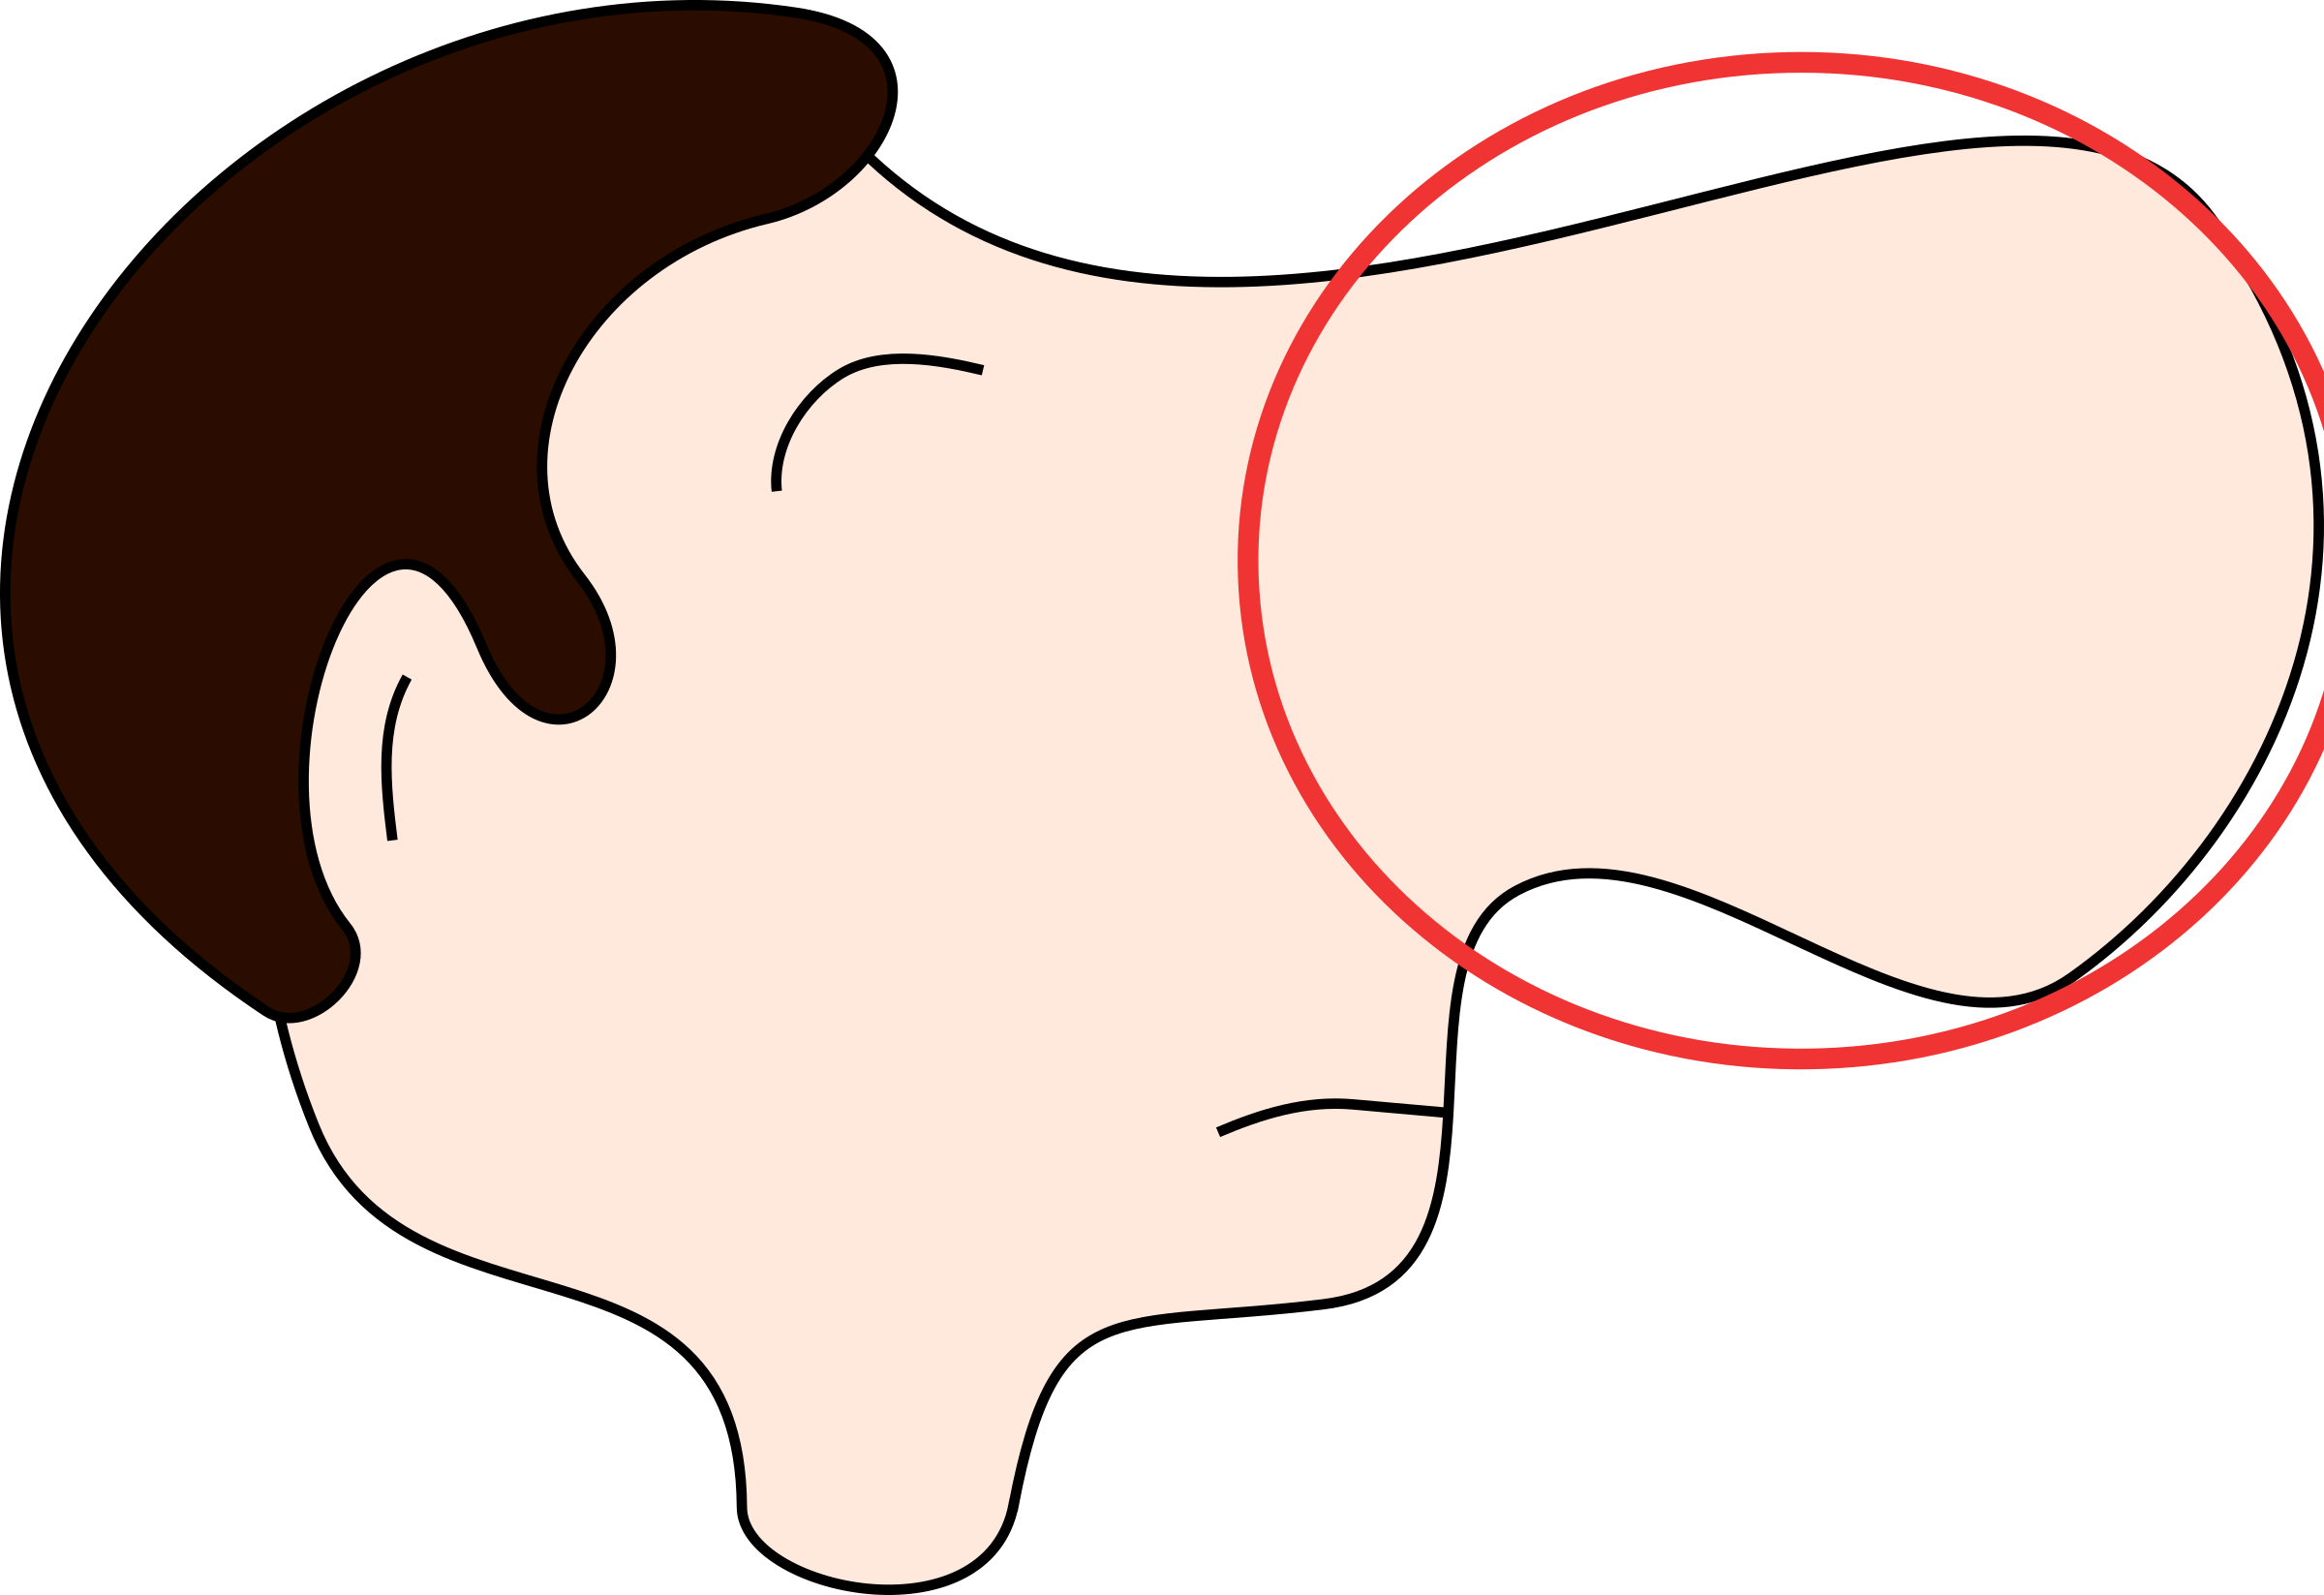 ears clipart nose